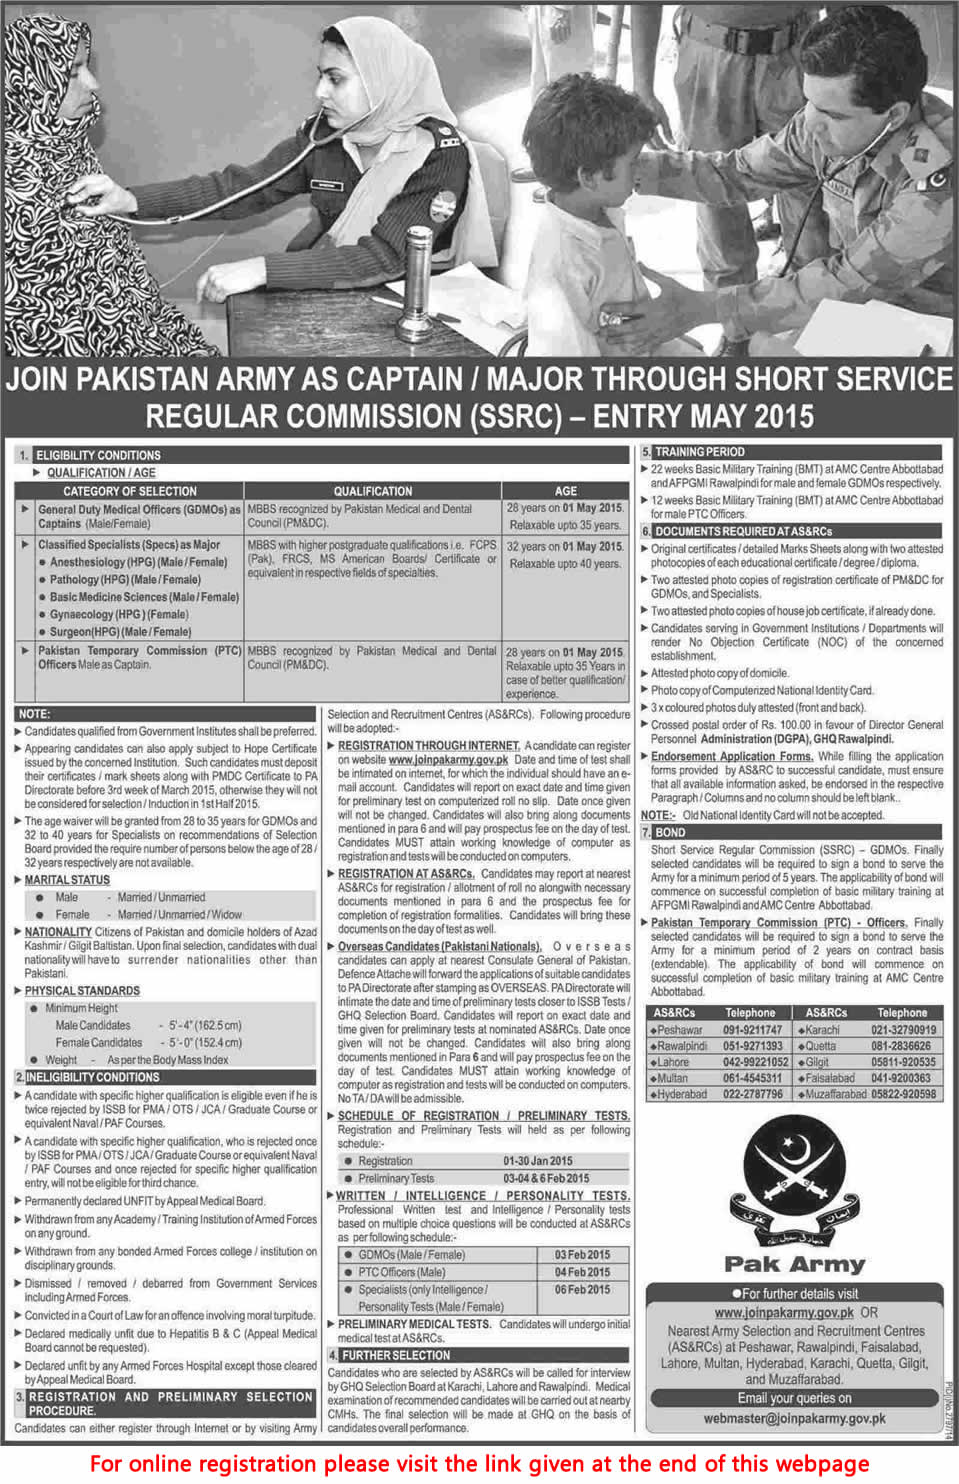 Join Pakistan Army 2015 May Entry as Captain / Major through Short Service Regular Commission for Medical Doctors